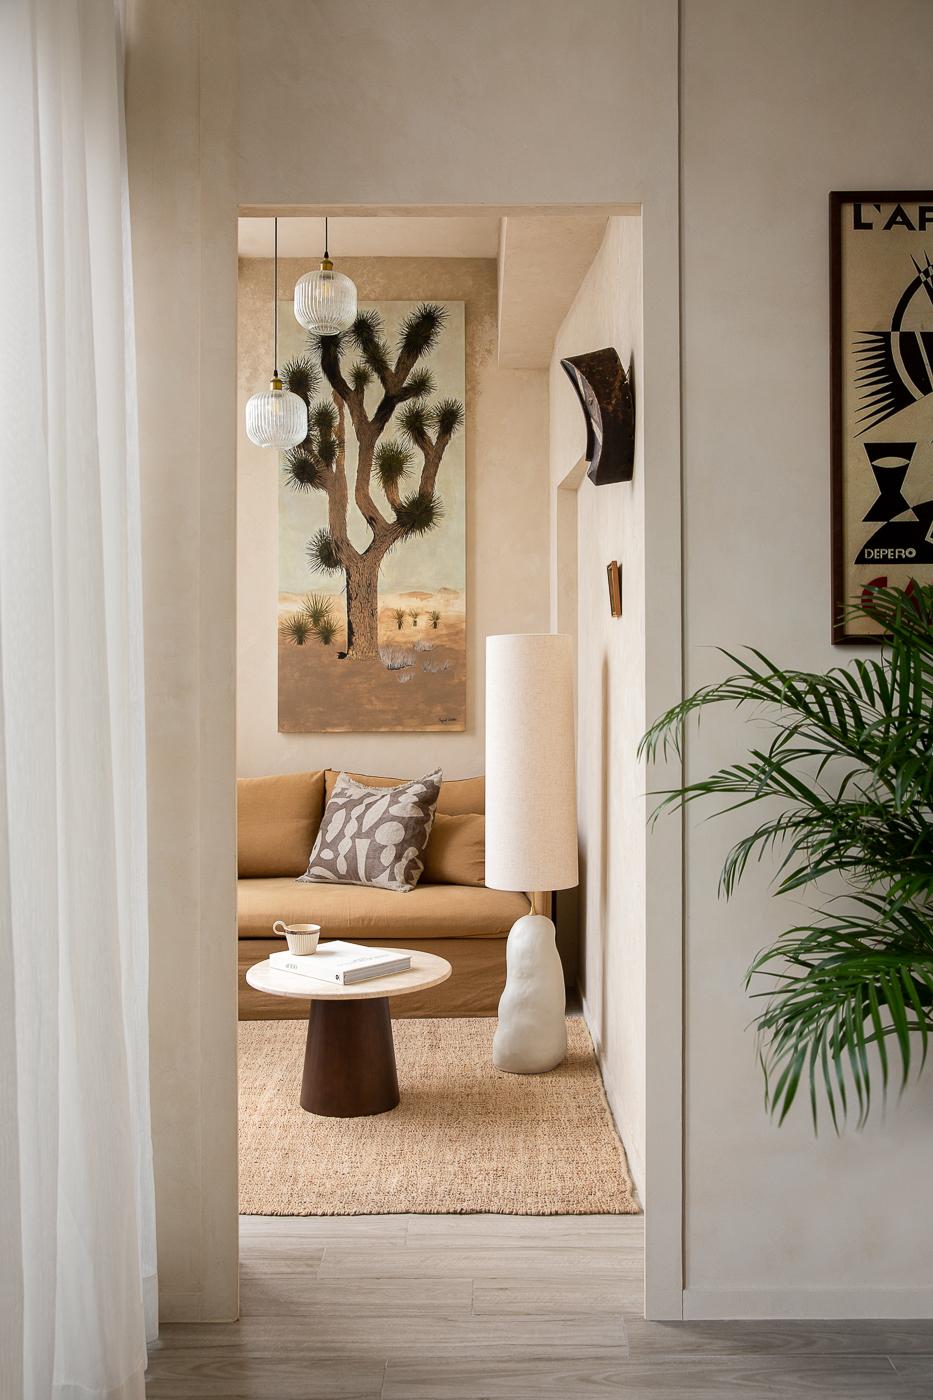 This travel-inspired 600 sq. ft. Hong Kong apartment is transformed into an exotic oasis